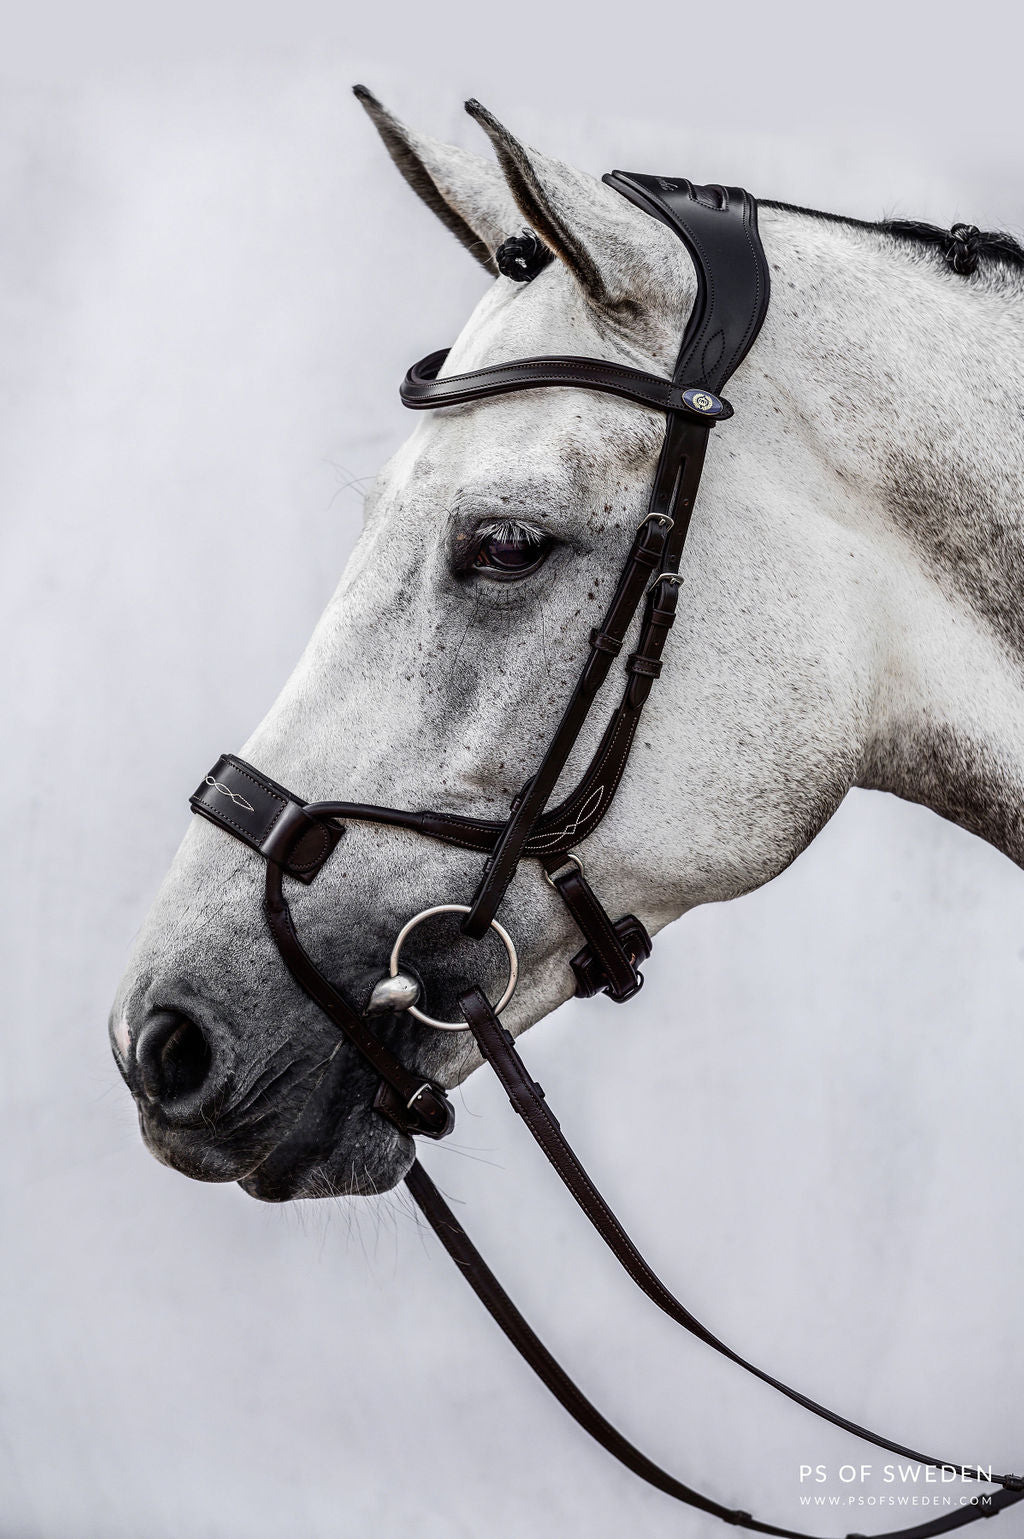 The noseband also features a whole new design. It does not put any pressure on the teeth from the outside which reduces possible bit-related issues. 